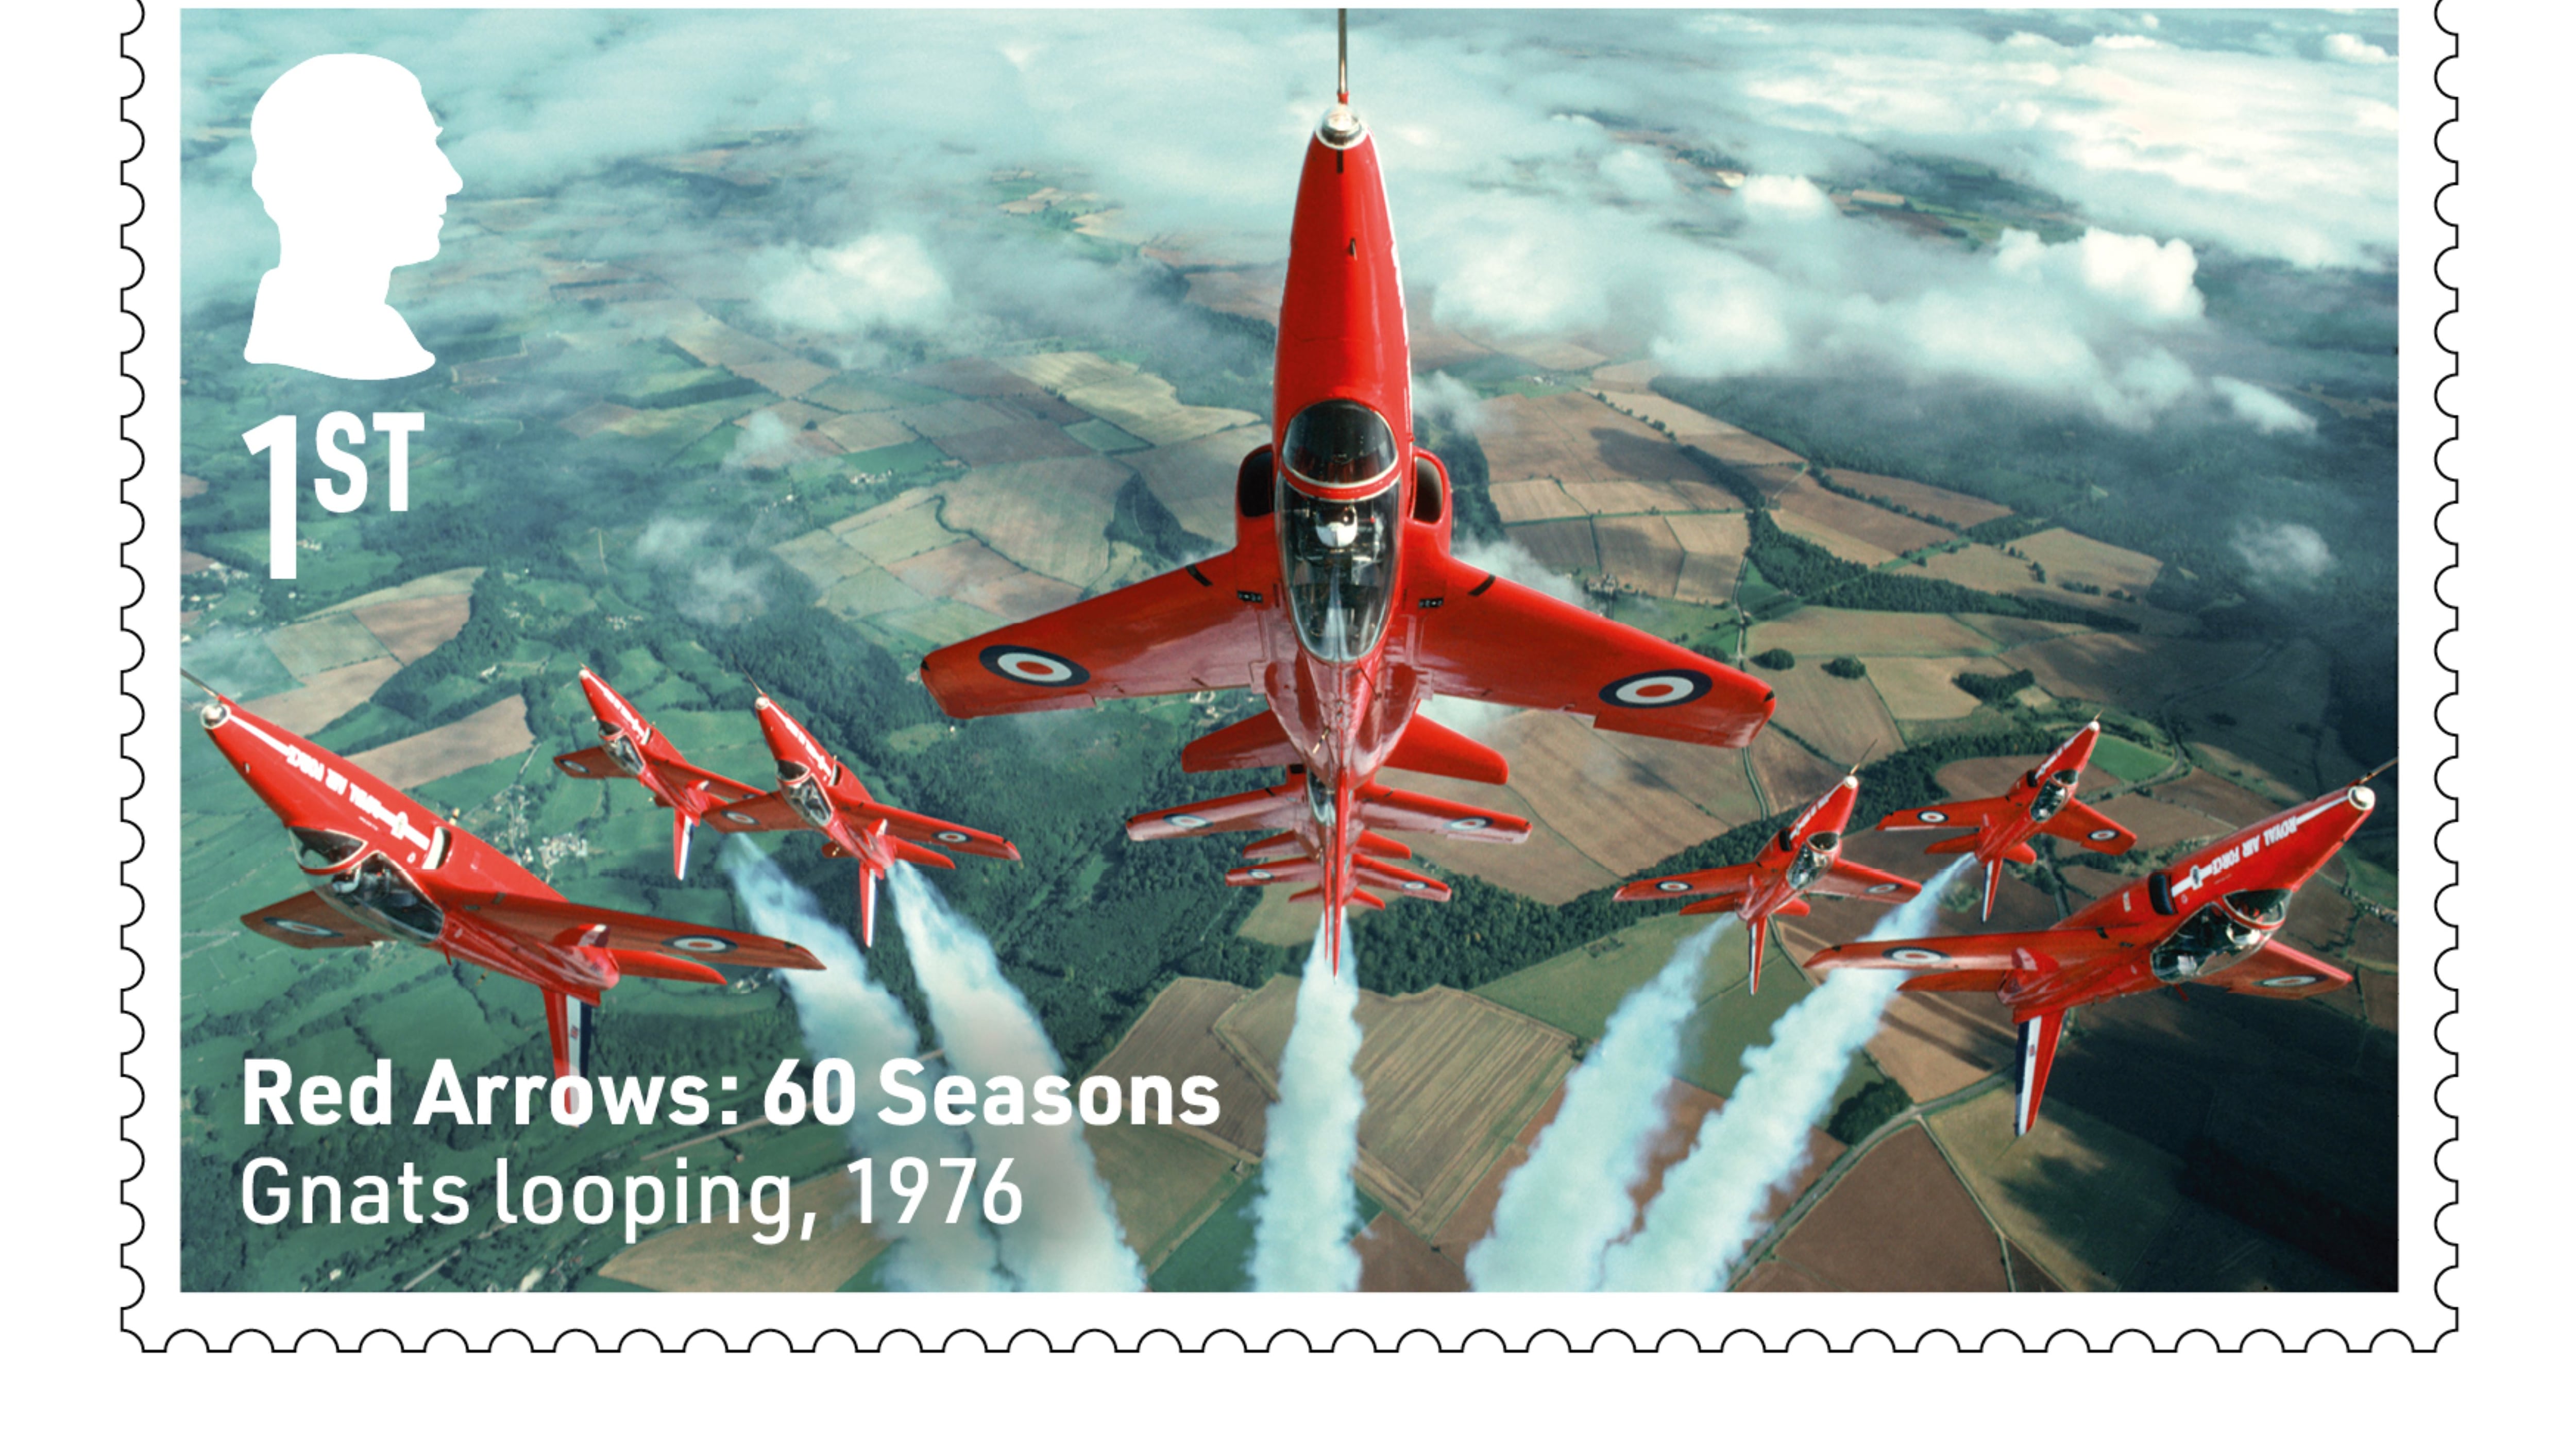 Royal Mail is launching a new set of stamps to mark the 60th display season of the Red Arrows